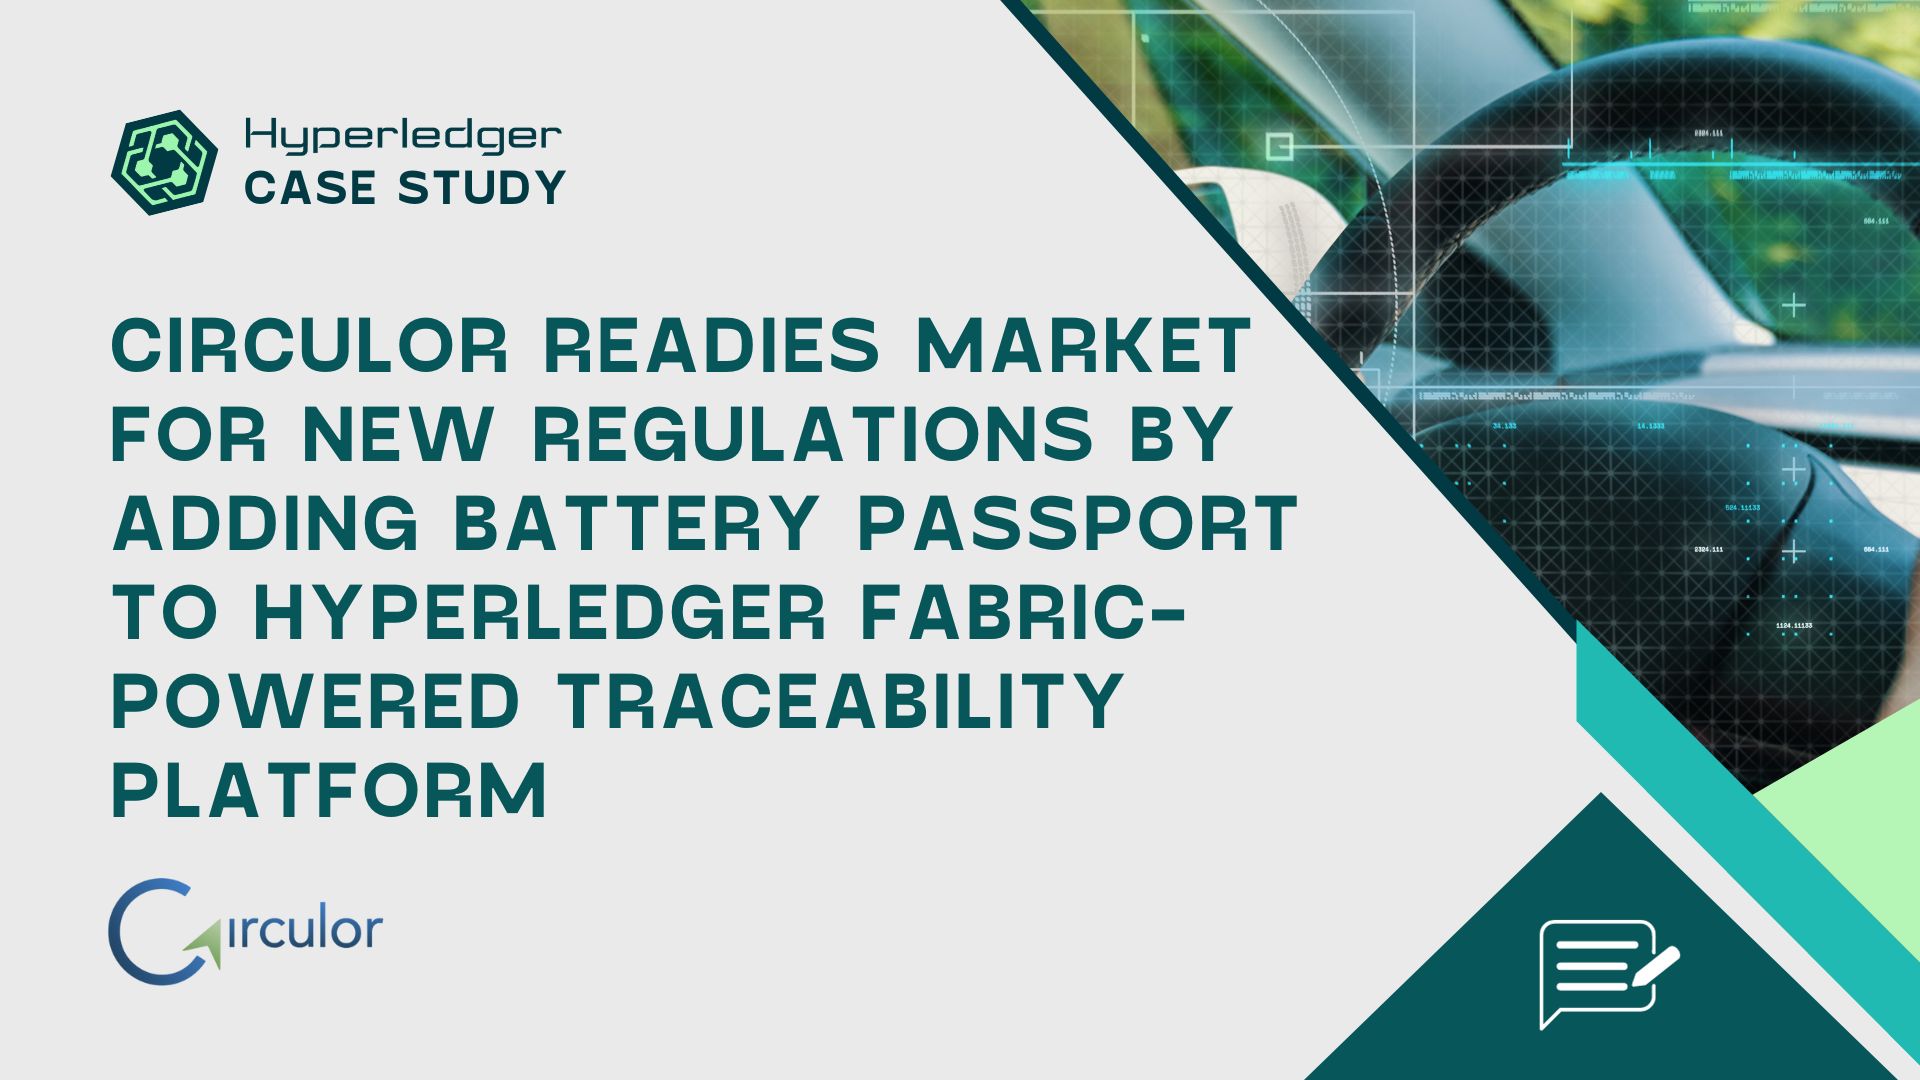 Circulor Readies Market for New Regulations by Adding Battery Passport to Hyperledger Fabric-Powered Traceability Platform